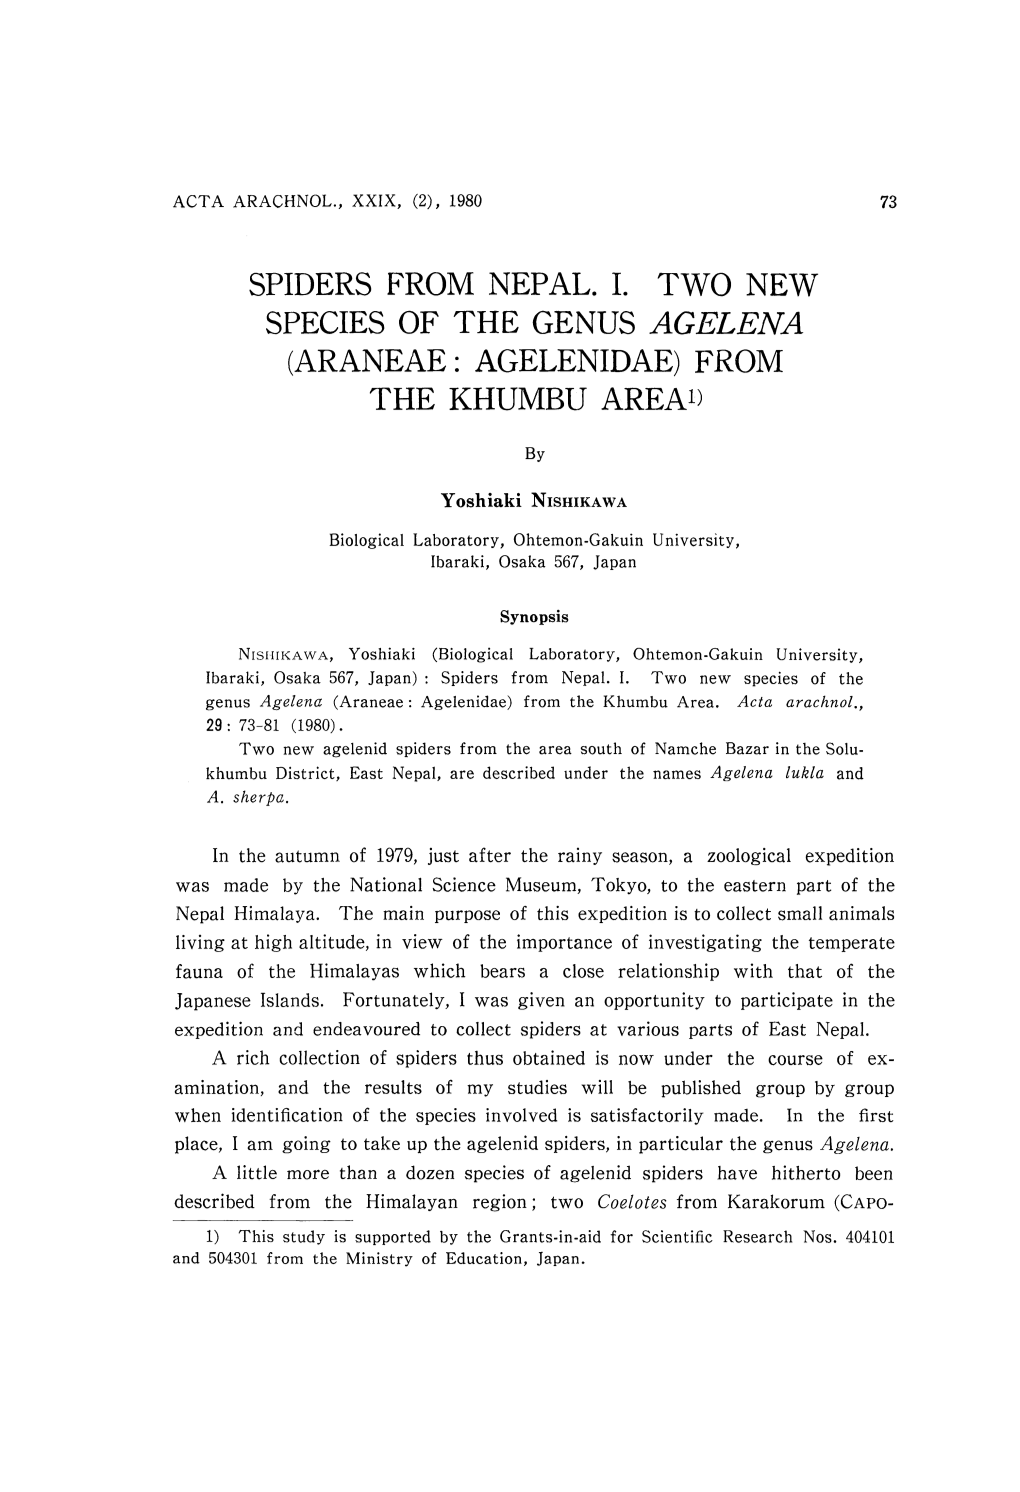 Spiders from Nepal, I. Two New Species of the Genus Agelena (Araneae: Agelenidae) from the Khumbu Area1)